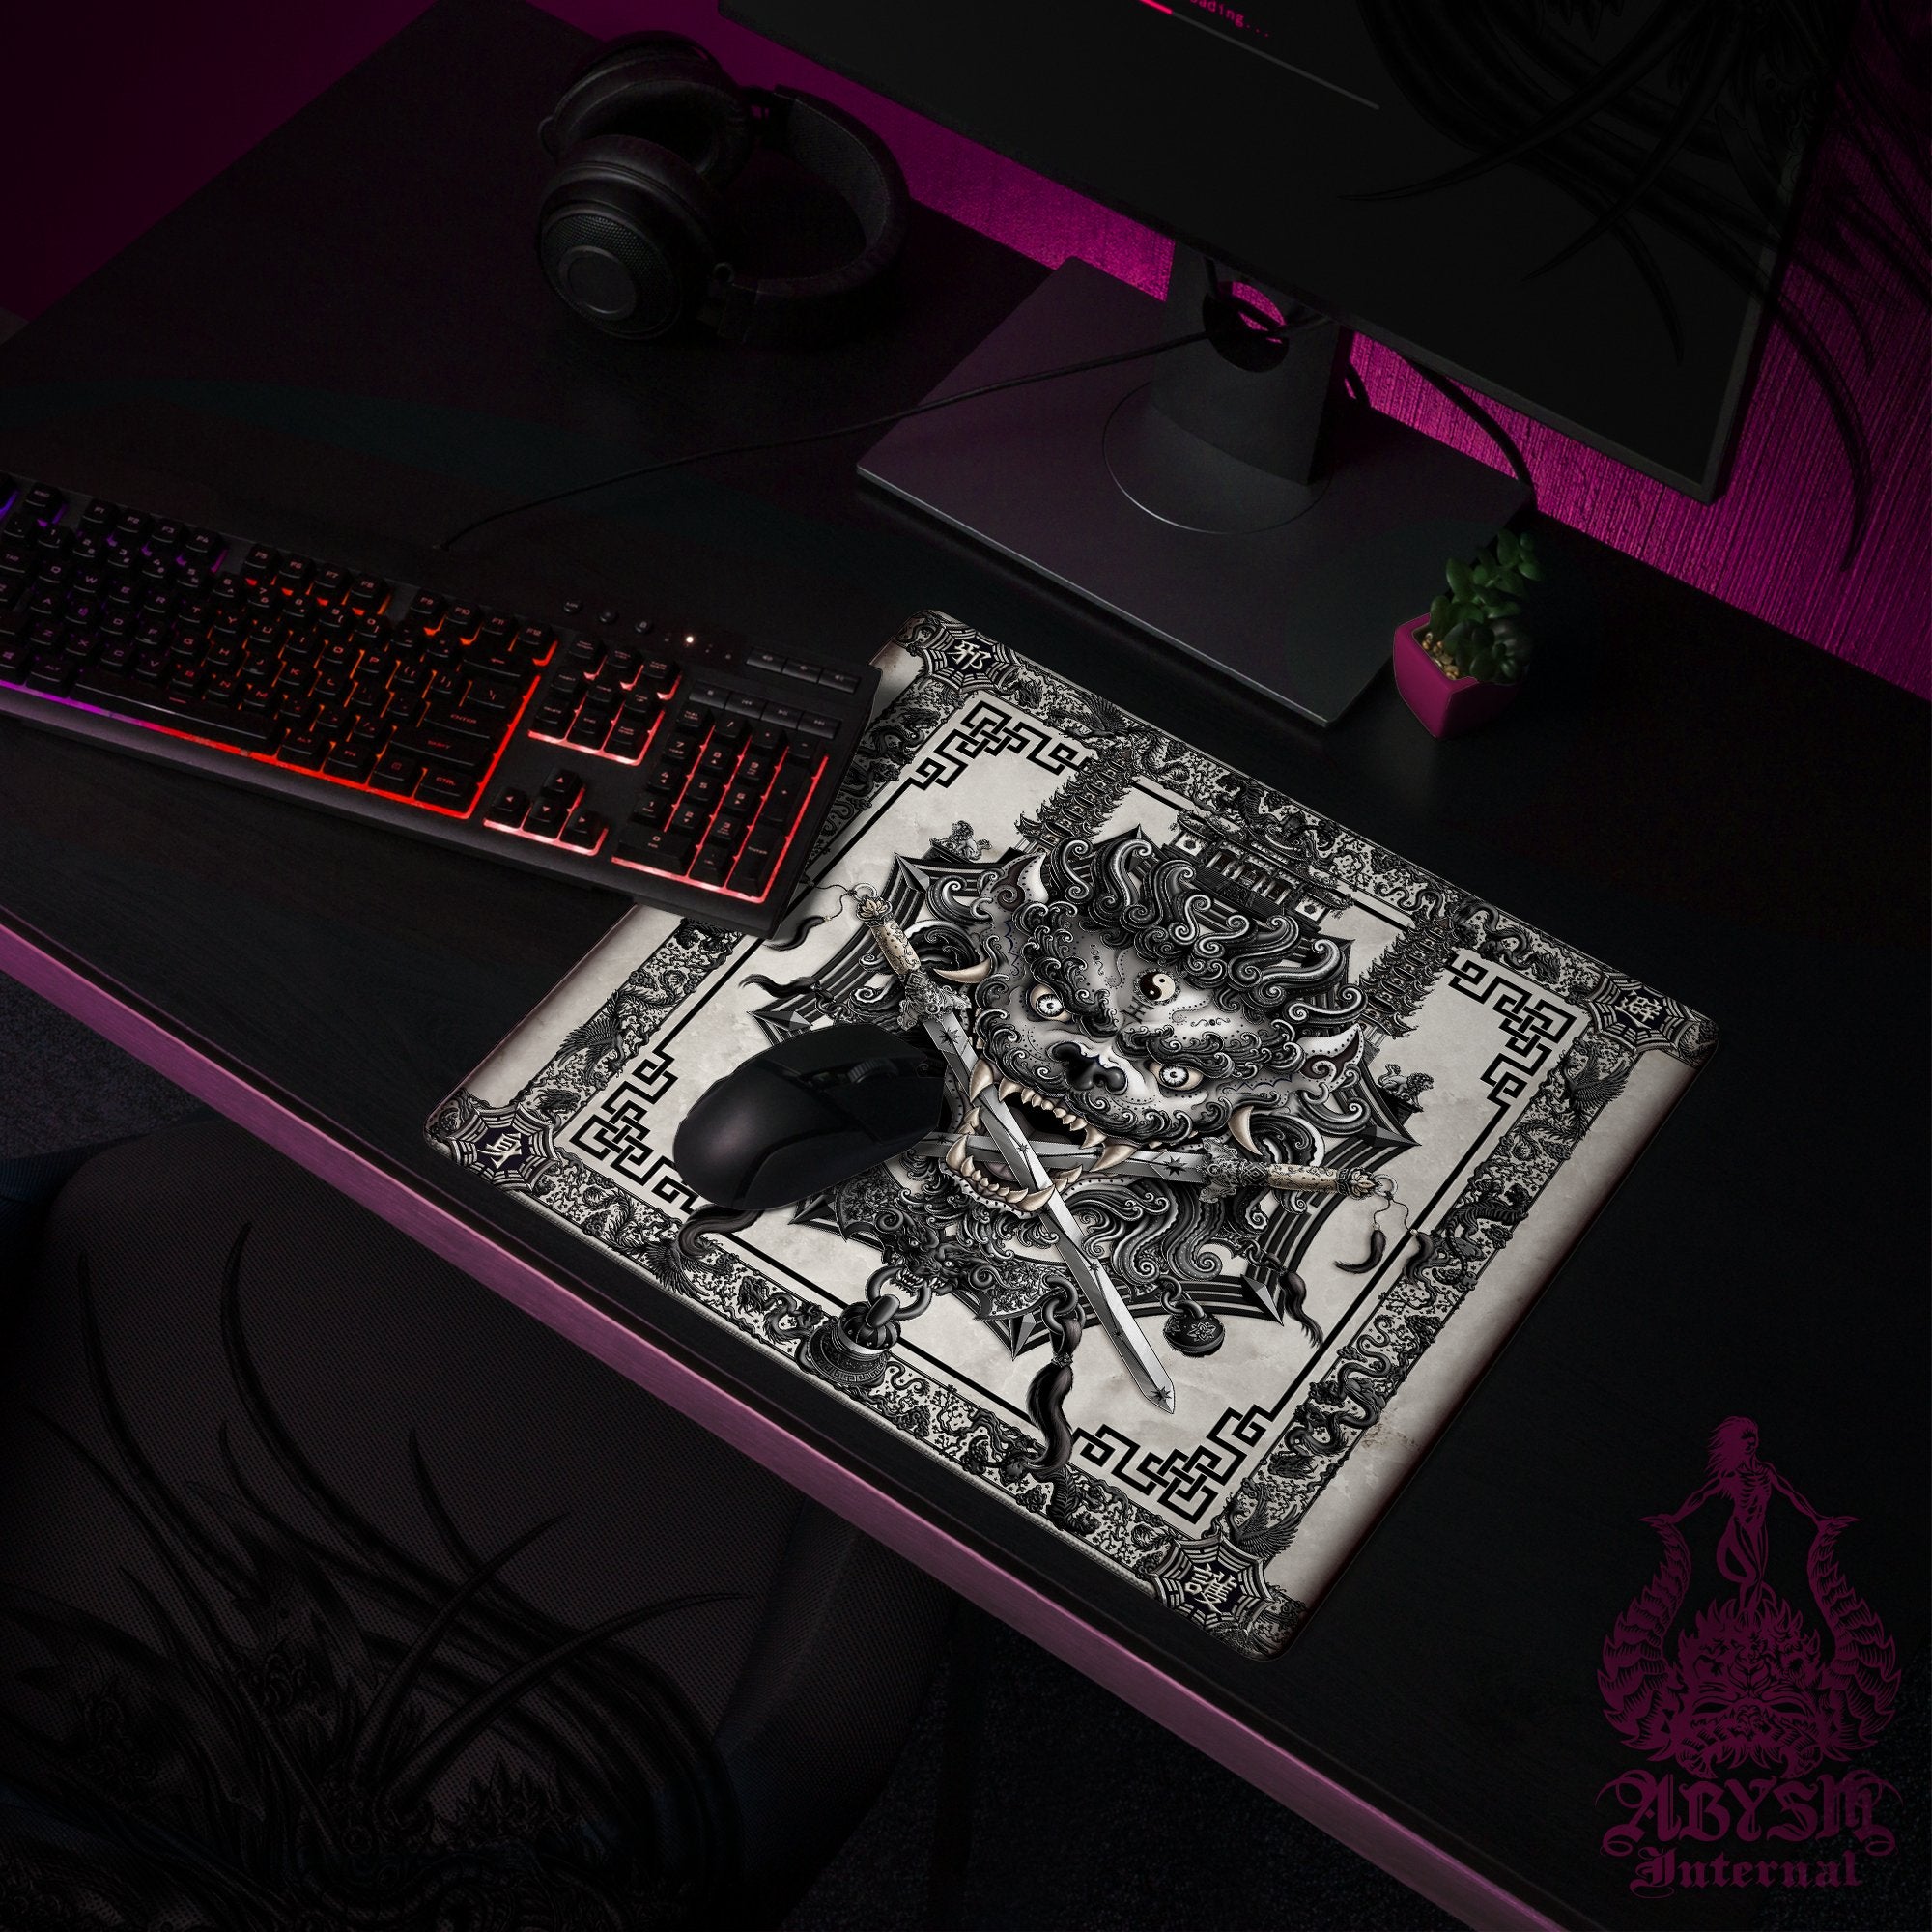 Chinese Lion Mouse Pad, Taiwan Gaming Desk Mat, Black and White Goth Workpad, Asian Table Protector Cover, Fantasy Art Print - Abysm Internal